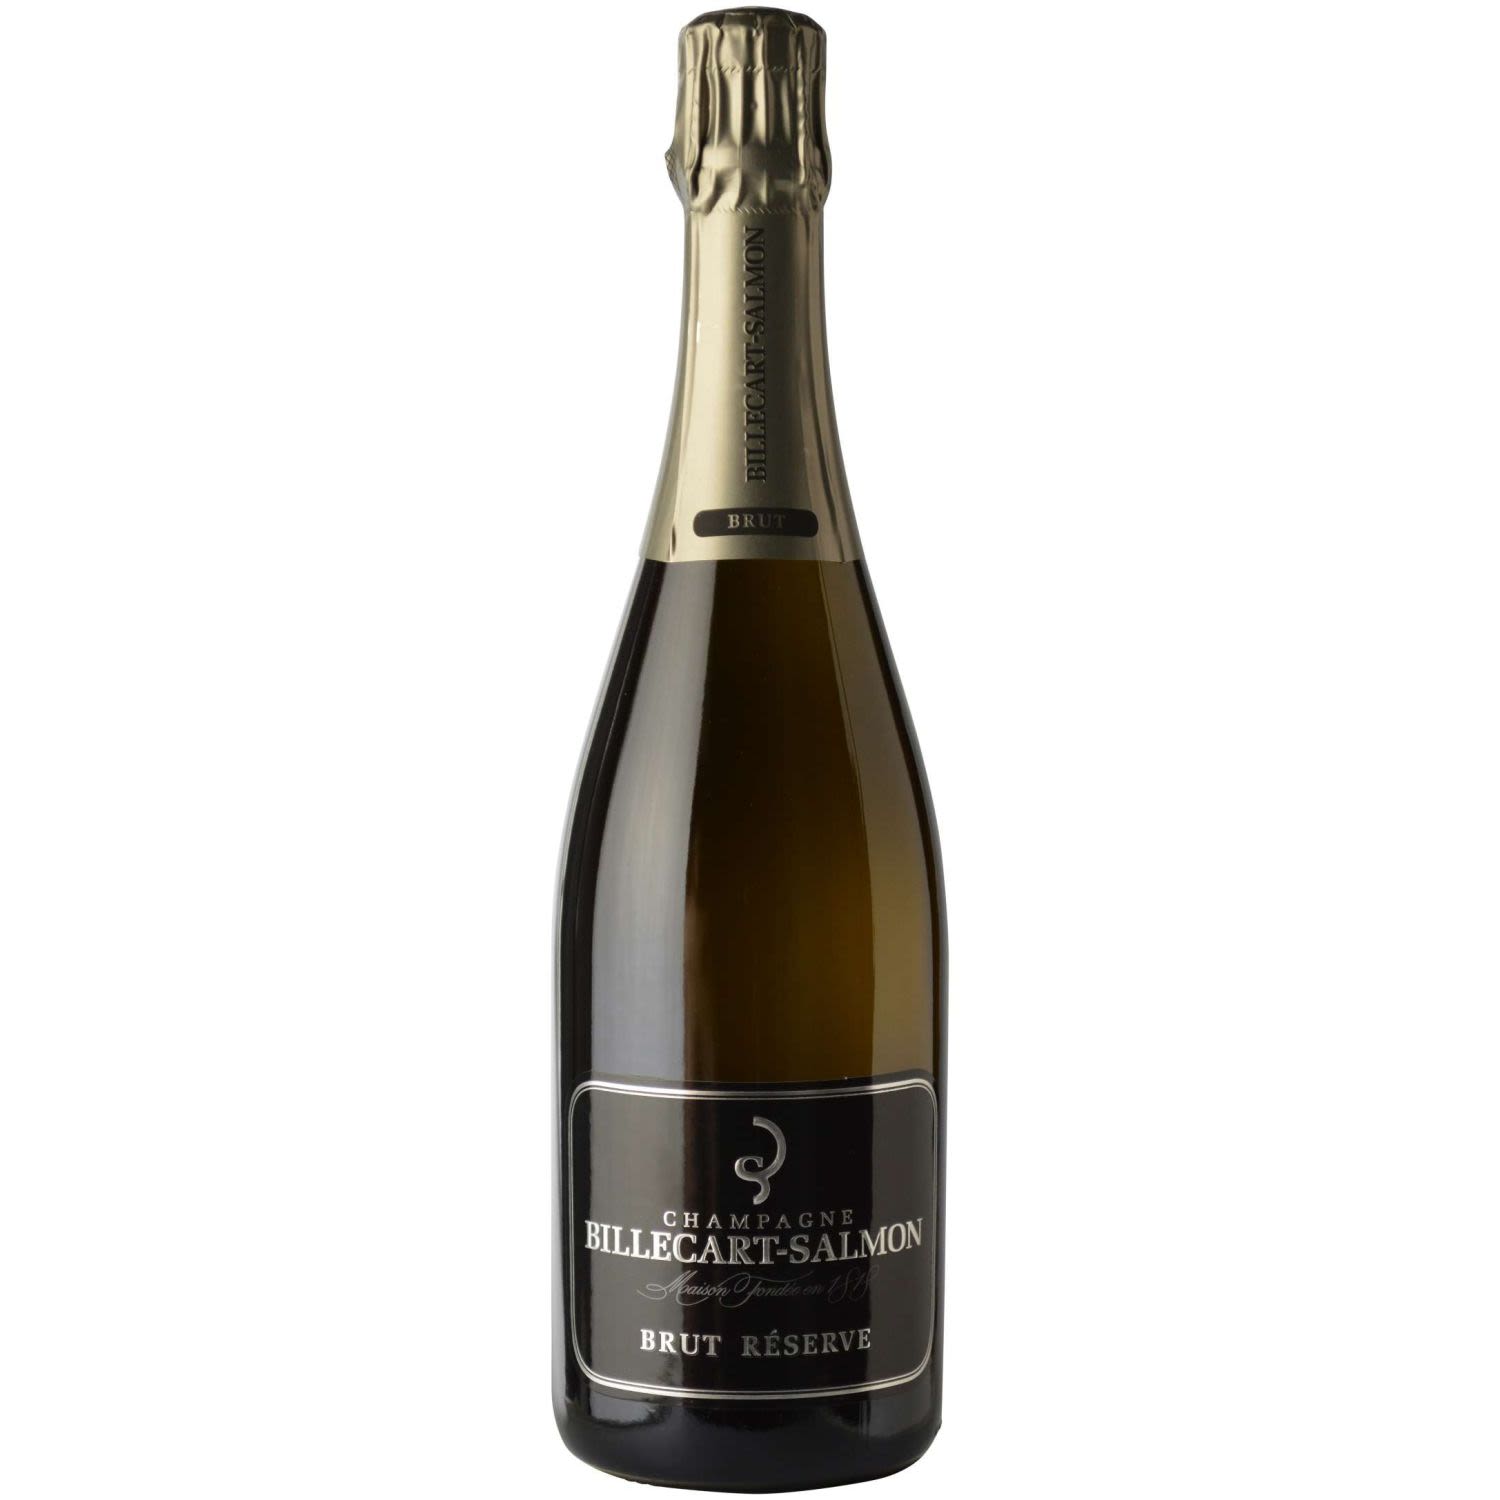 Balance and harmony combine together in this light and subtle champagne. Its blend is made up of Pinot Noir, Chardonnay and Pinot Meunier sourced from the very best sites of the Champagne region. It is the ideal partner to delight your guests on every occasion, both as an aperitif and throughout the entirety of a meal.<br /> <br />Alcohol Volume: 12.00%<br /><br />Pack Format: Bottle<br /><br />Standard Drinks: 7.1</br /><br />Pack Type: Bottle<br /><br />Country of Origin: France<br /><br />Region: Champagne<br /><br />Vintage: NV<br />